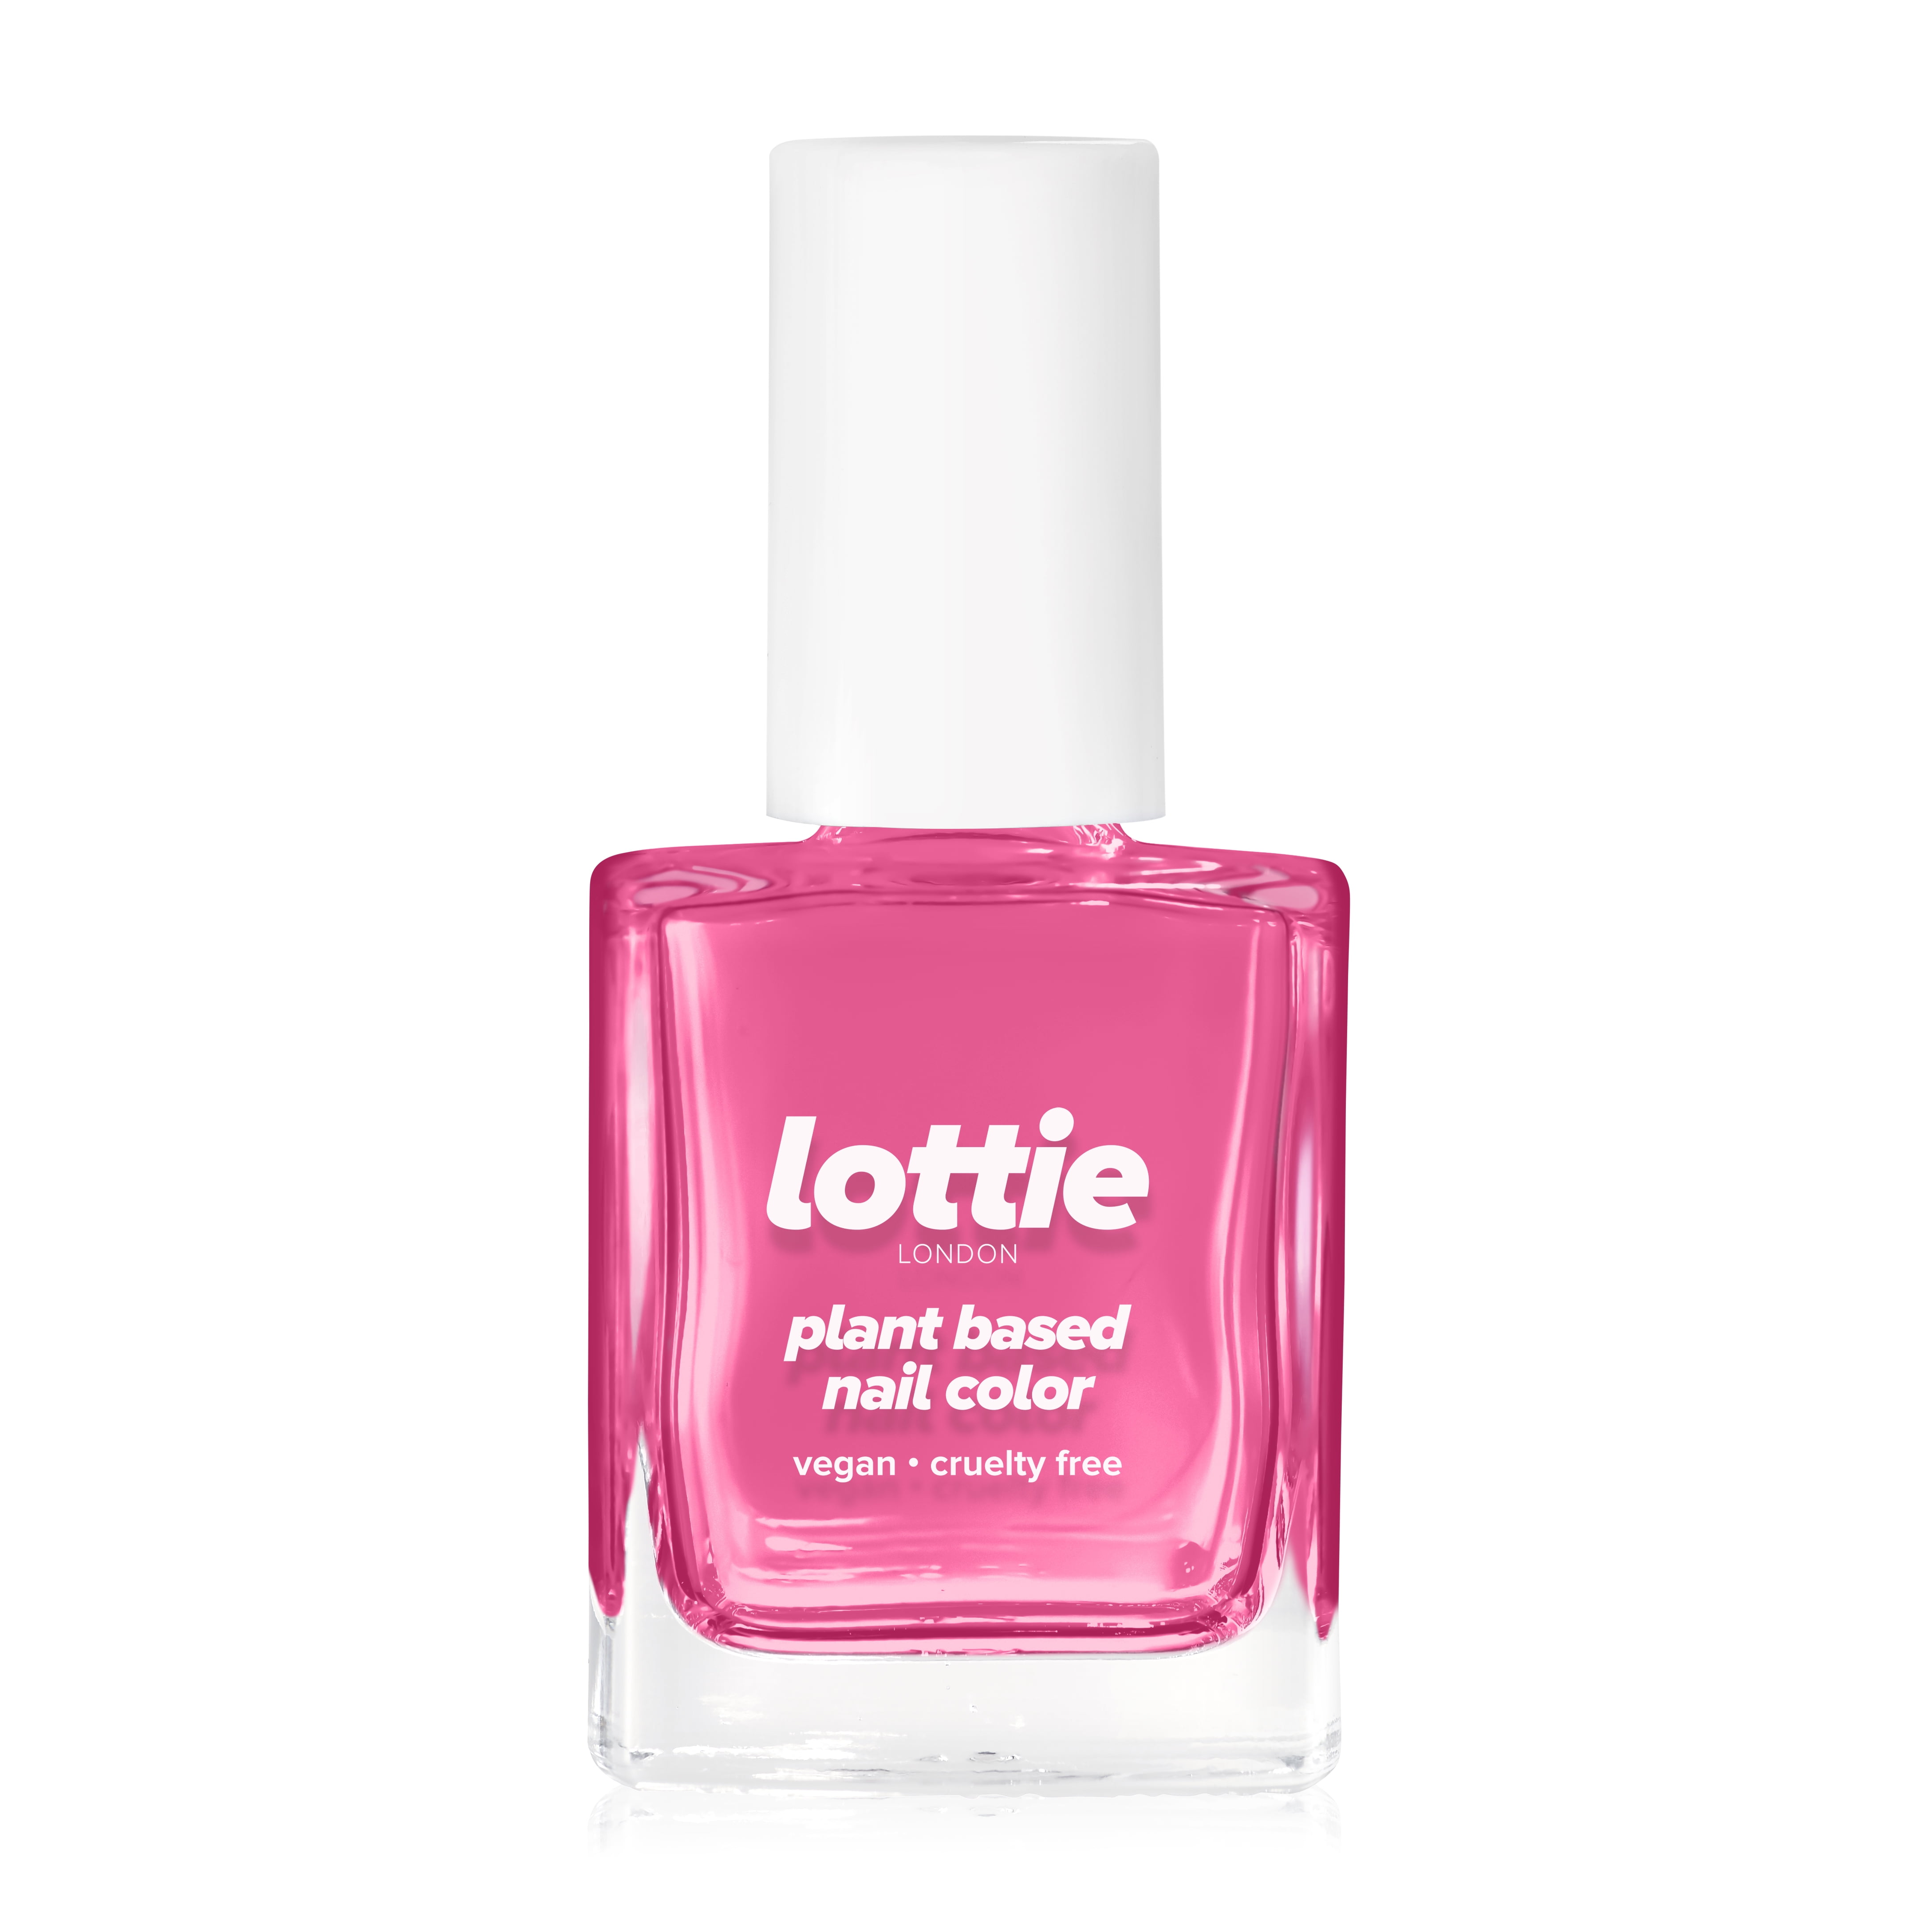 Lottie London Plant Based Nail color, All Free, fuchsia, What's the T, 0.33 fl oz